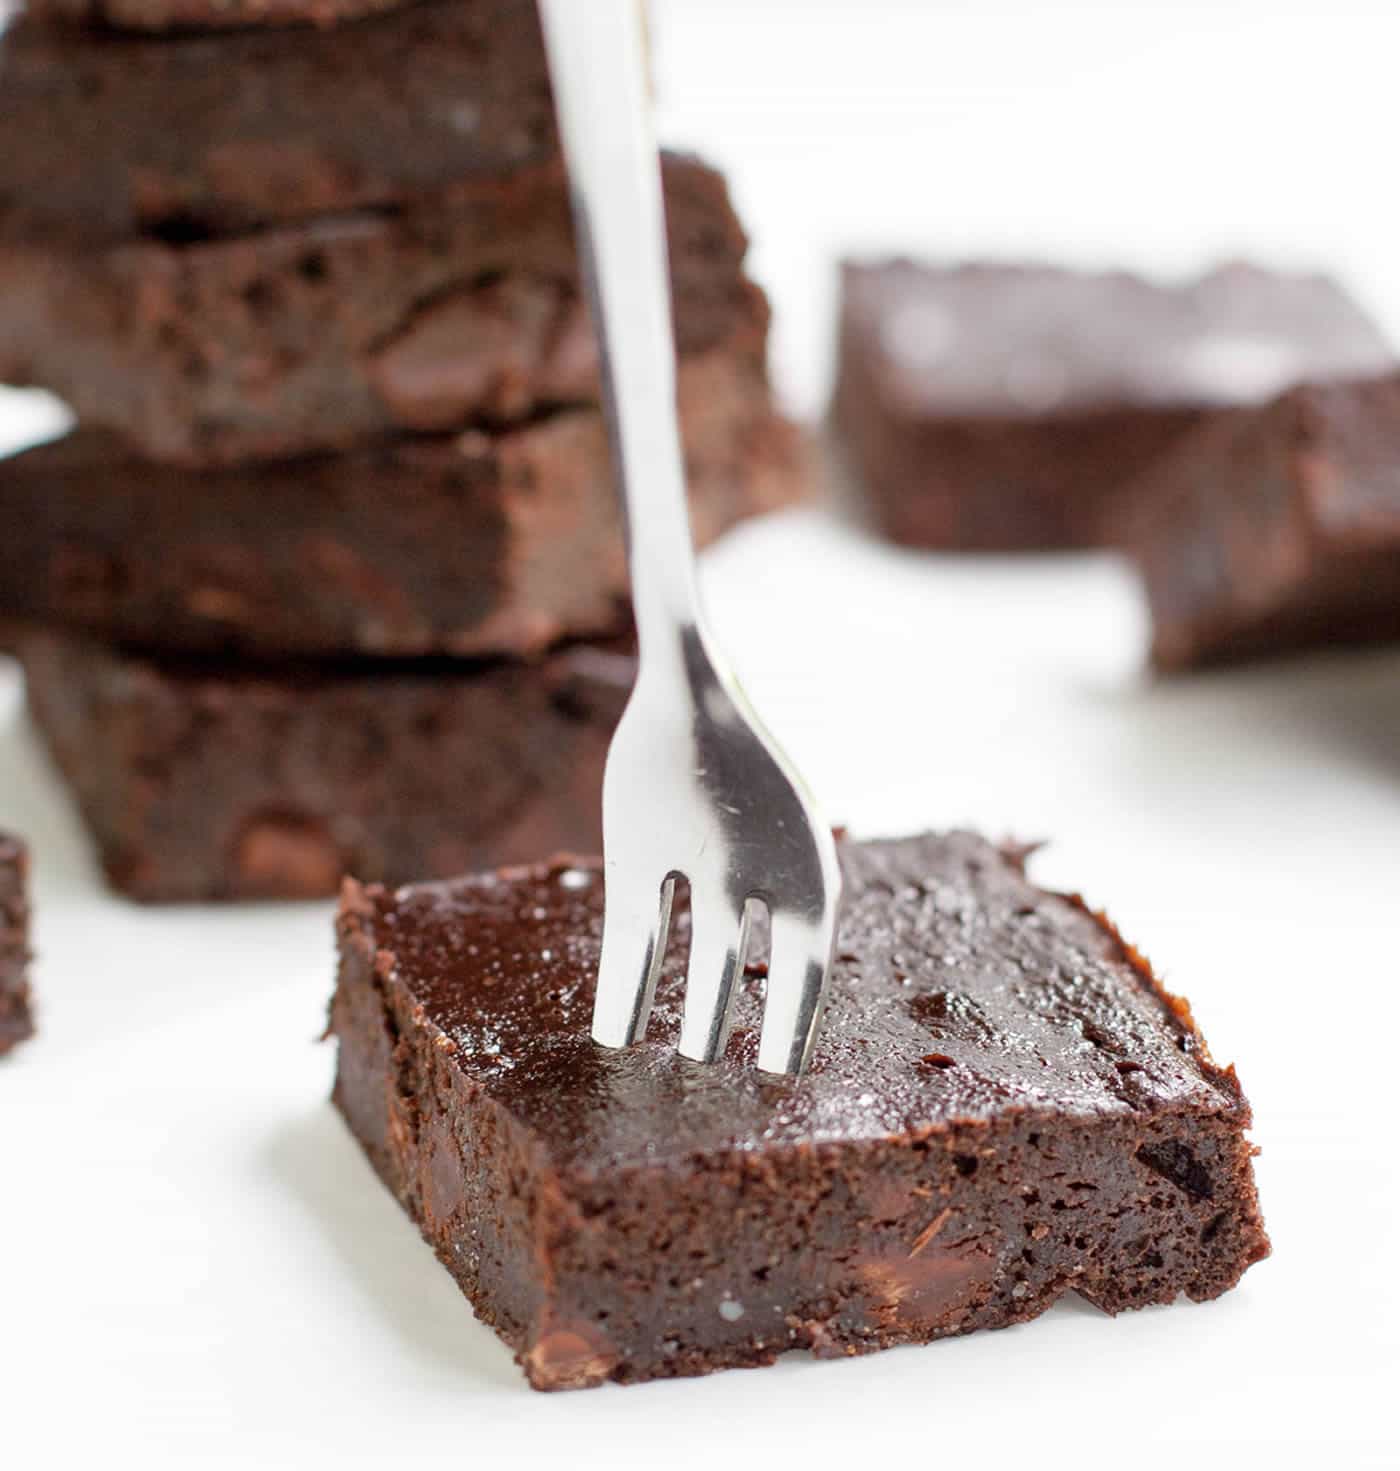 Fudgy Zucchini Brownies. A super fudgy brownie that mixes up easily in your food processor! Lower in sugar, flour and fat than many traditional brownie recipes.